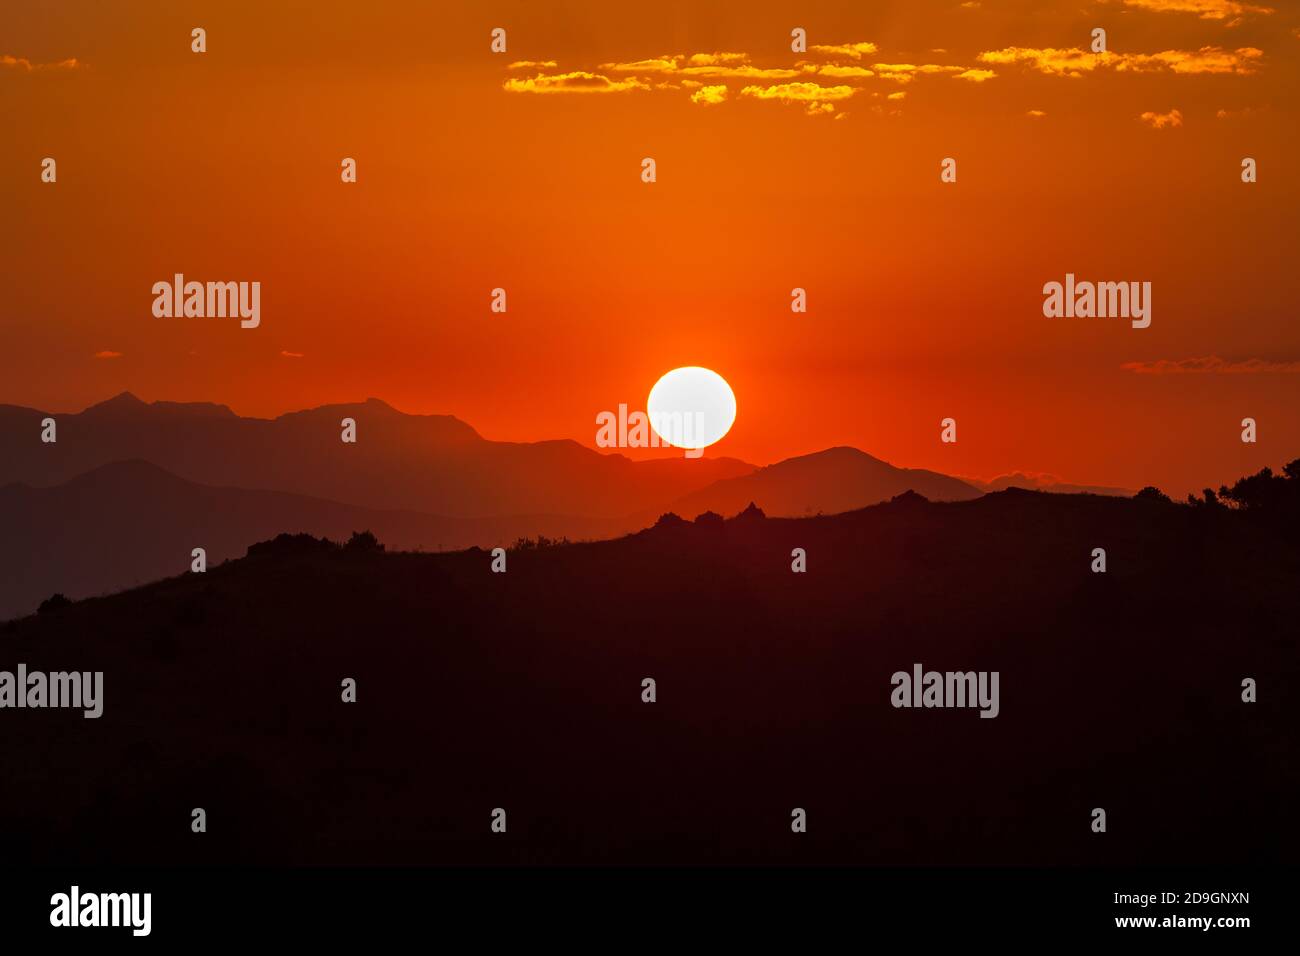 Fiery sunset over the mountains Stock Photo